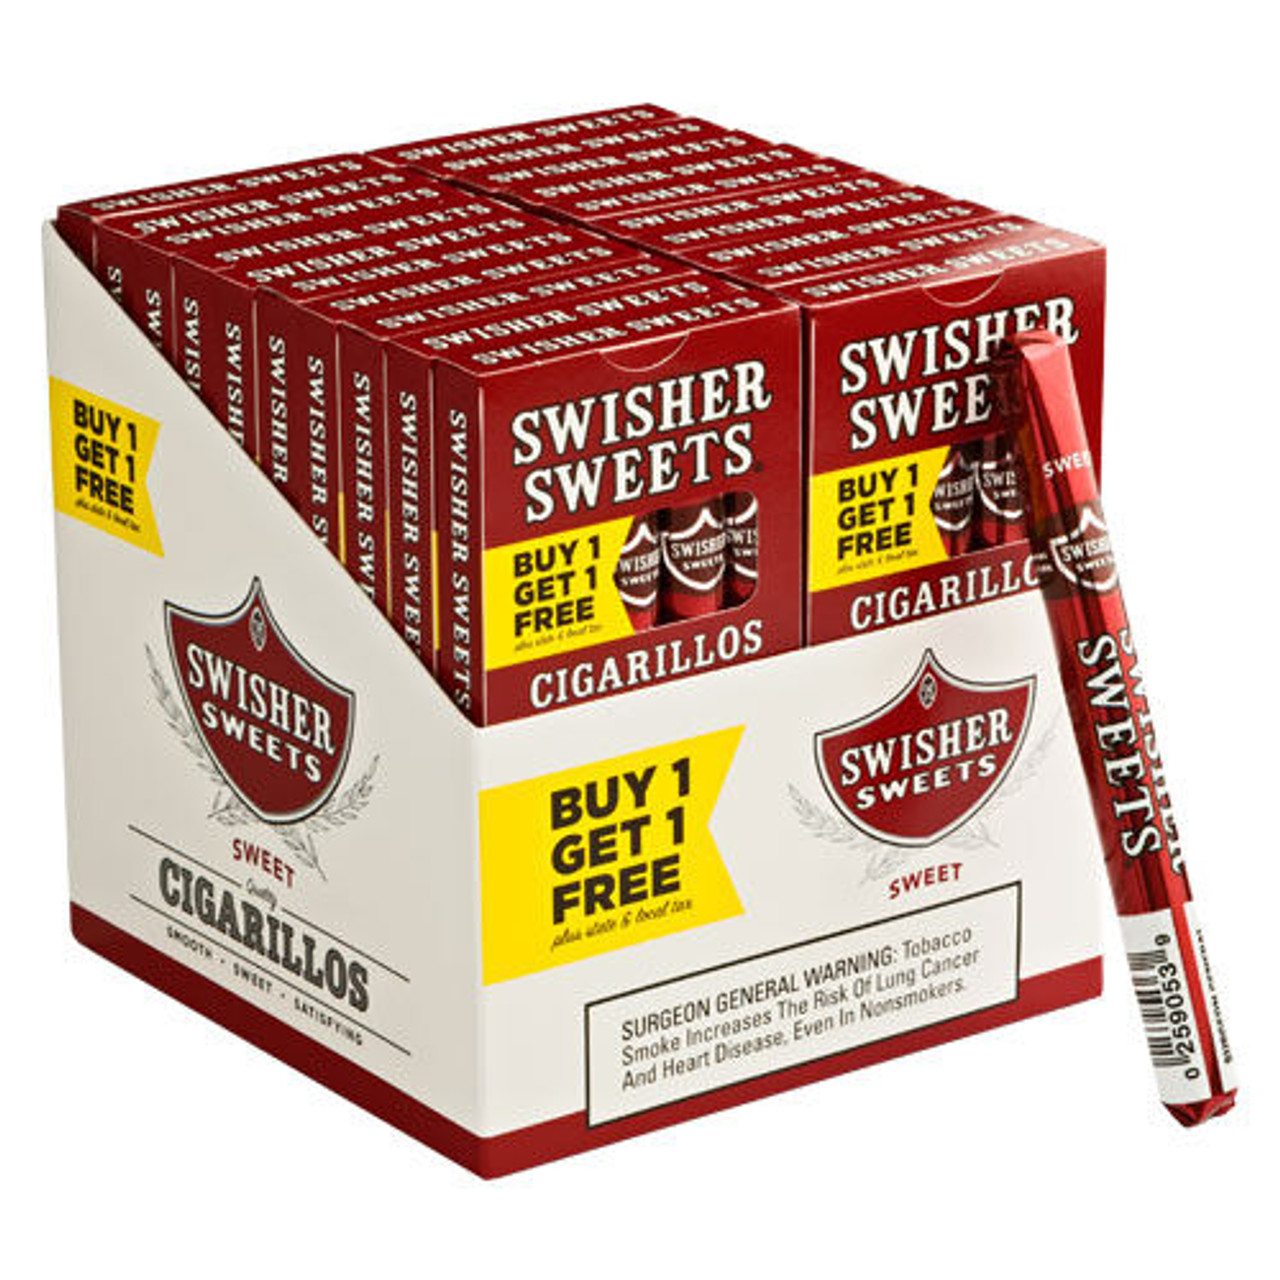 Swisher Sweets Cigarillos Sweets Cigars - 4 x 30 (20 Packs of 5 (100 total)) *Box